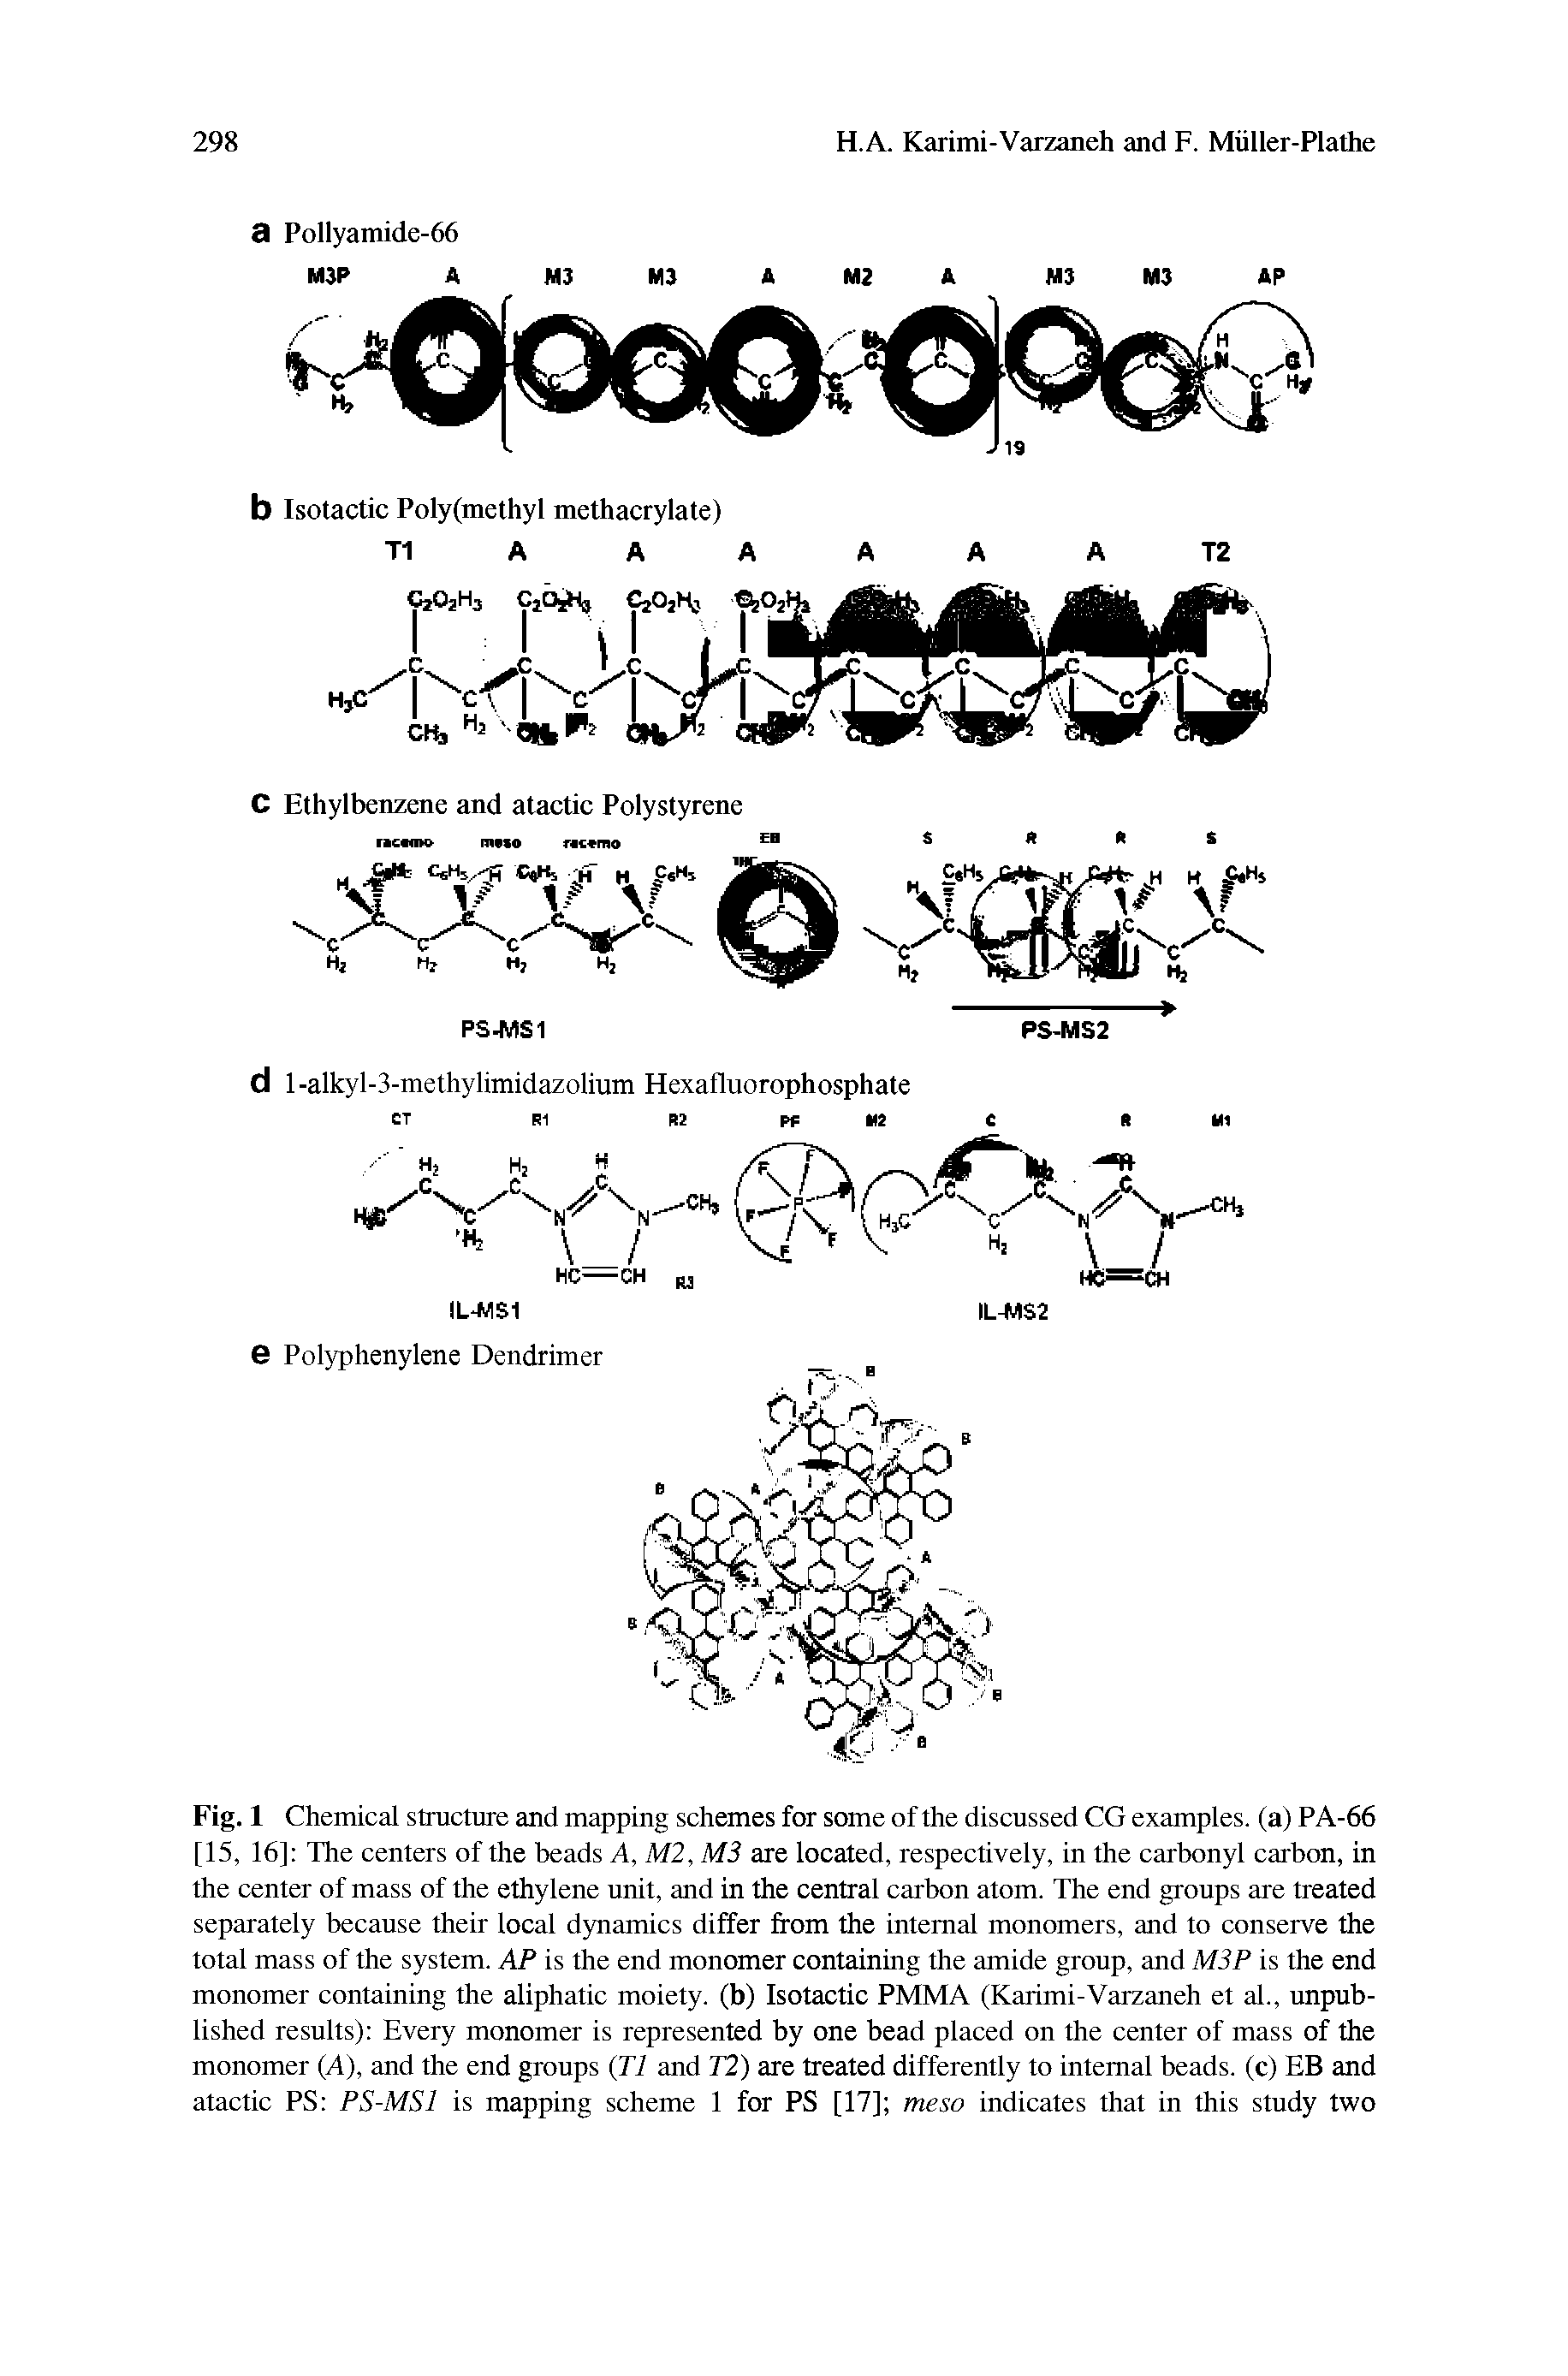 Fig. 1 Chemical structure and mapping schemes for some of the discussed CG examples, (a) PA-66 [15, 16] The centers of the beads A, M2, M3 are located, respectively, in the carbonyl carbon, in the center of mass of the ethylene unit, and in the central carbon atom. The end groups are treated separately because their local dynamics differ from the internal monomers, and to conserve the total mass of the system. AP is the end monomer containing the amide group, and MSP is the end monomer containing the aliphatic moiety, (b) Isotactic PMMA (Karimi-Varzaneh et al., unpublished results) Every monomer is represented by one bead placed on the center of mass of the monomer (A), and the end groups (T1 and 72) are treated differently to internal beads, (c) EB and atactic PS PS-MSl is mapping scheme 1 for PS [17] meso indicates that in this study two...